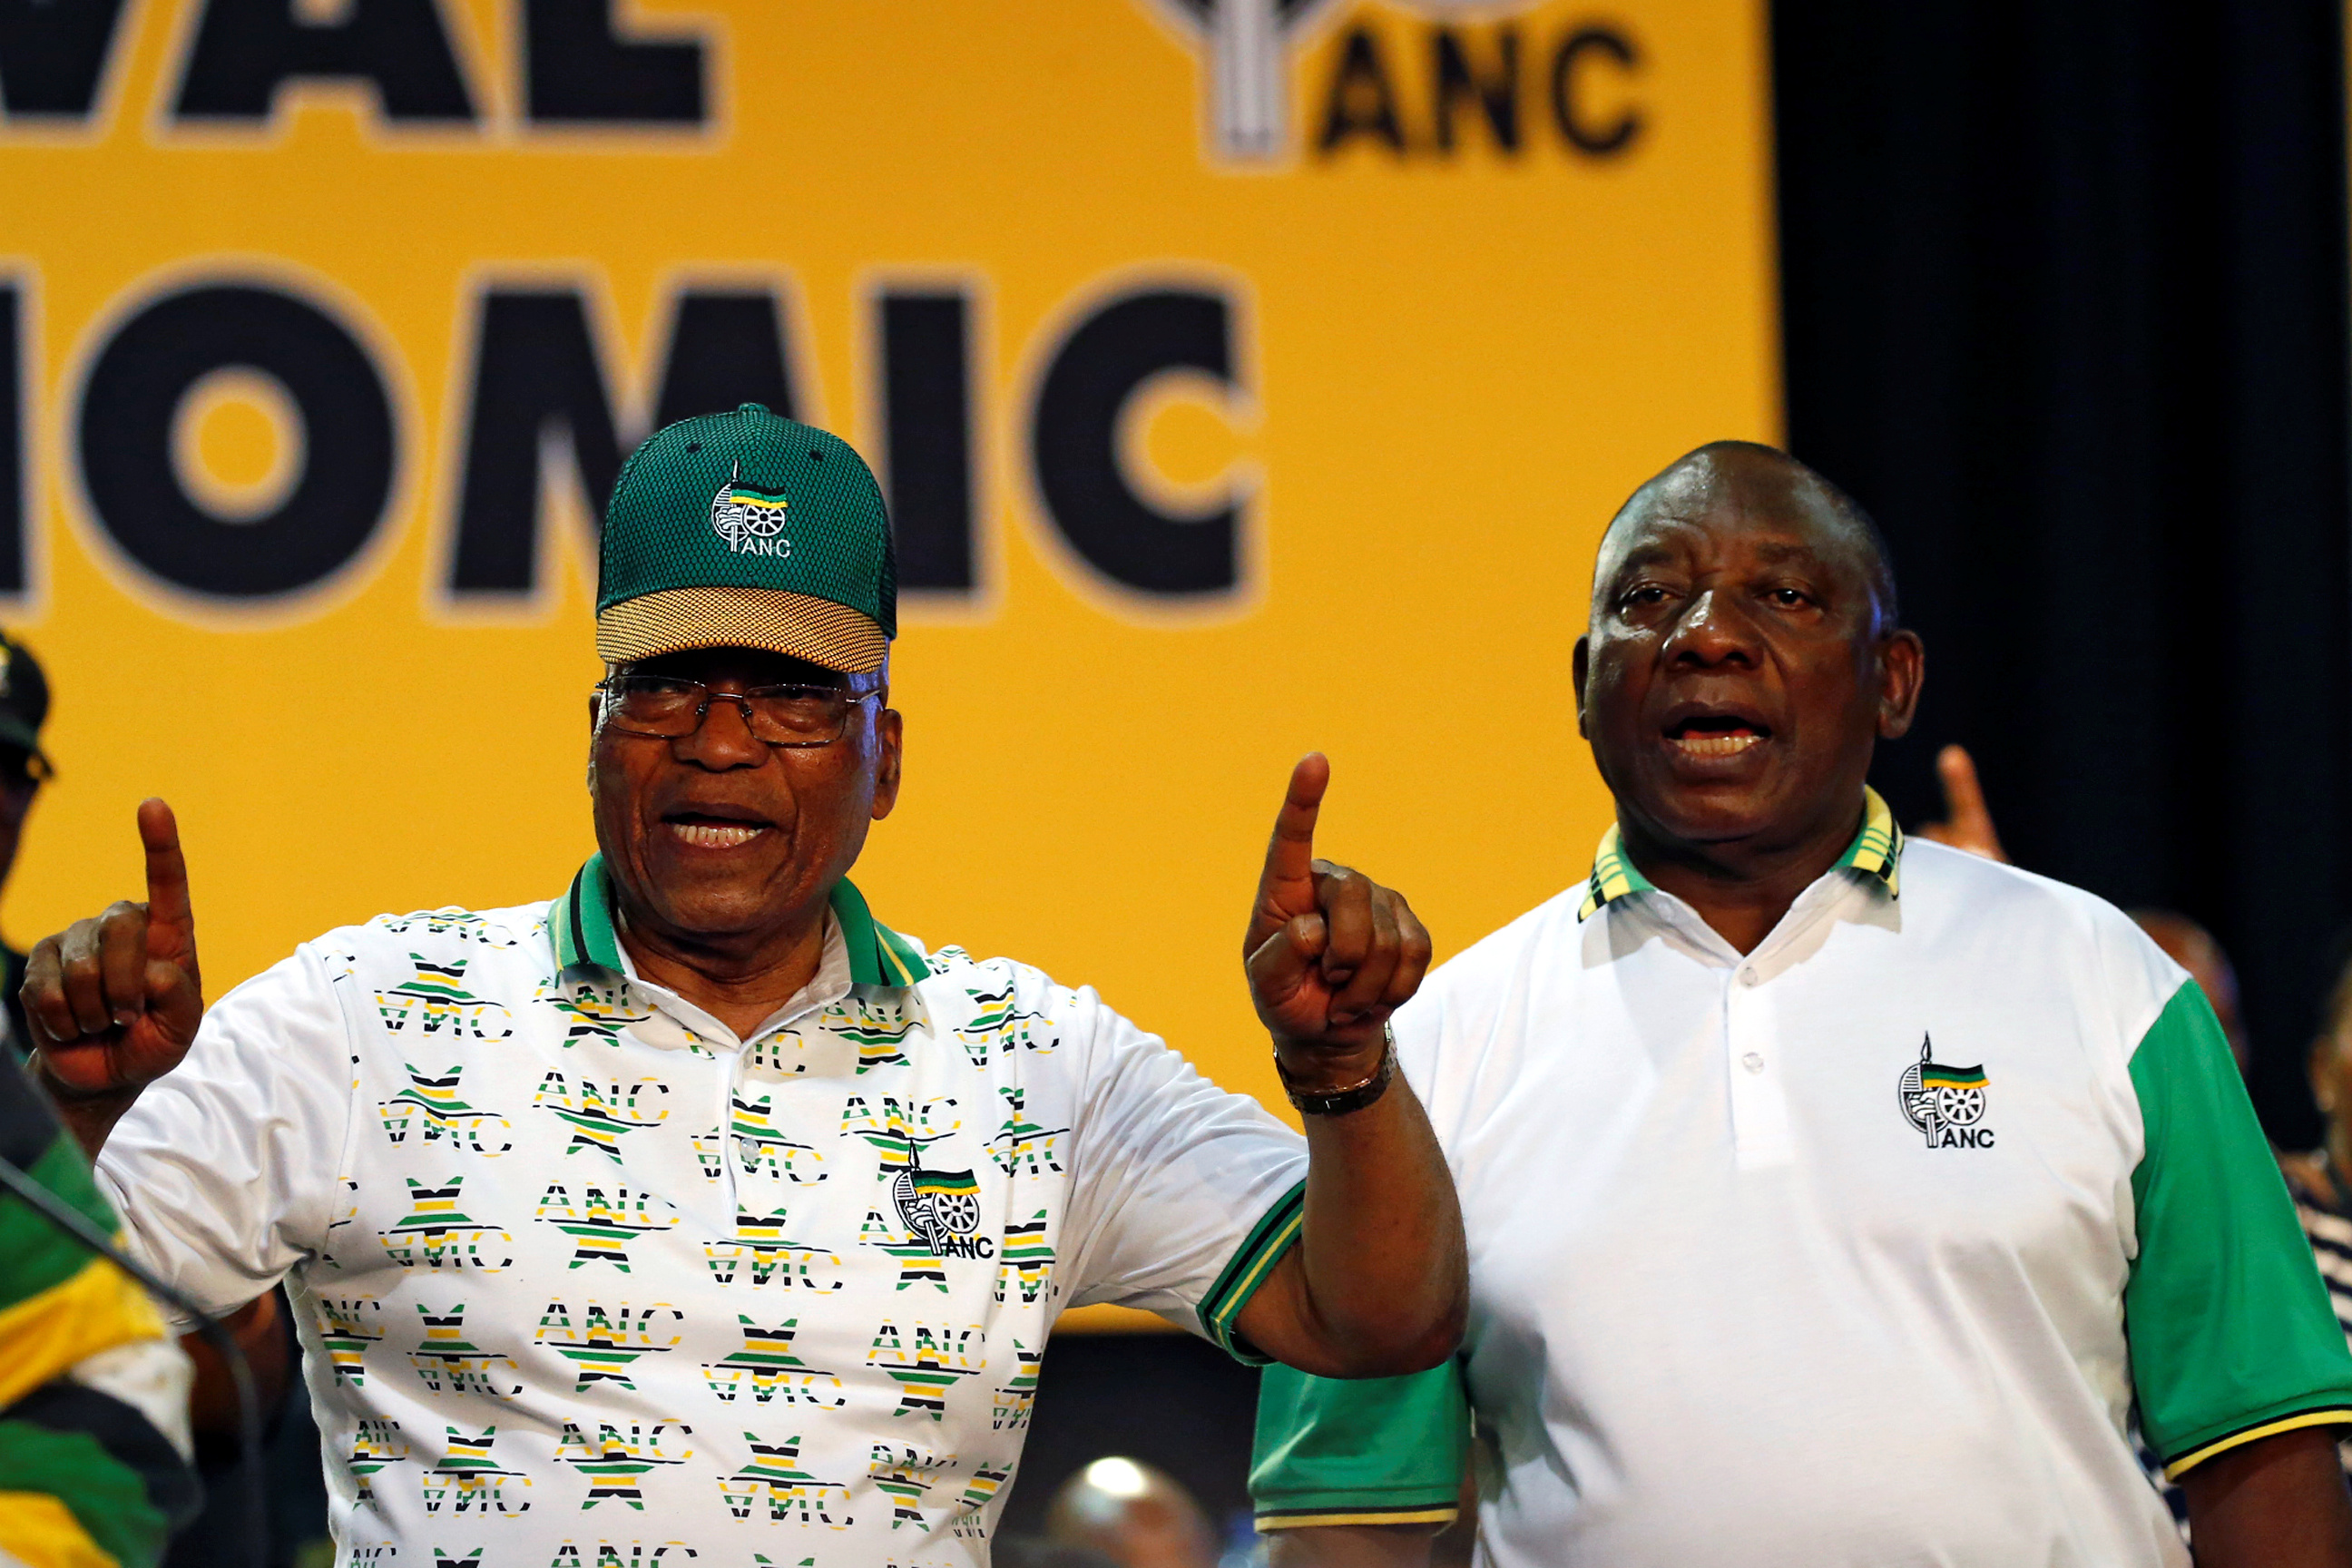 South Africa's President Jacob Zuma sings next to newly elected president of the ANC Cyril Ramaphosa during the 54th National Conference of the ruling African National Congress (ANC) at the Nasrec Expo Centre in Johannesburg